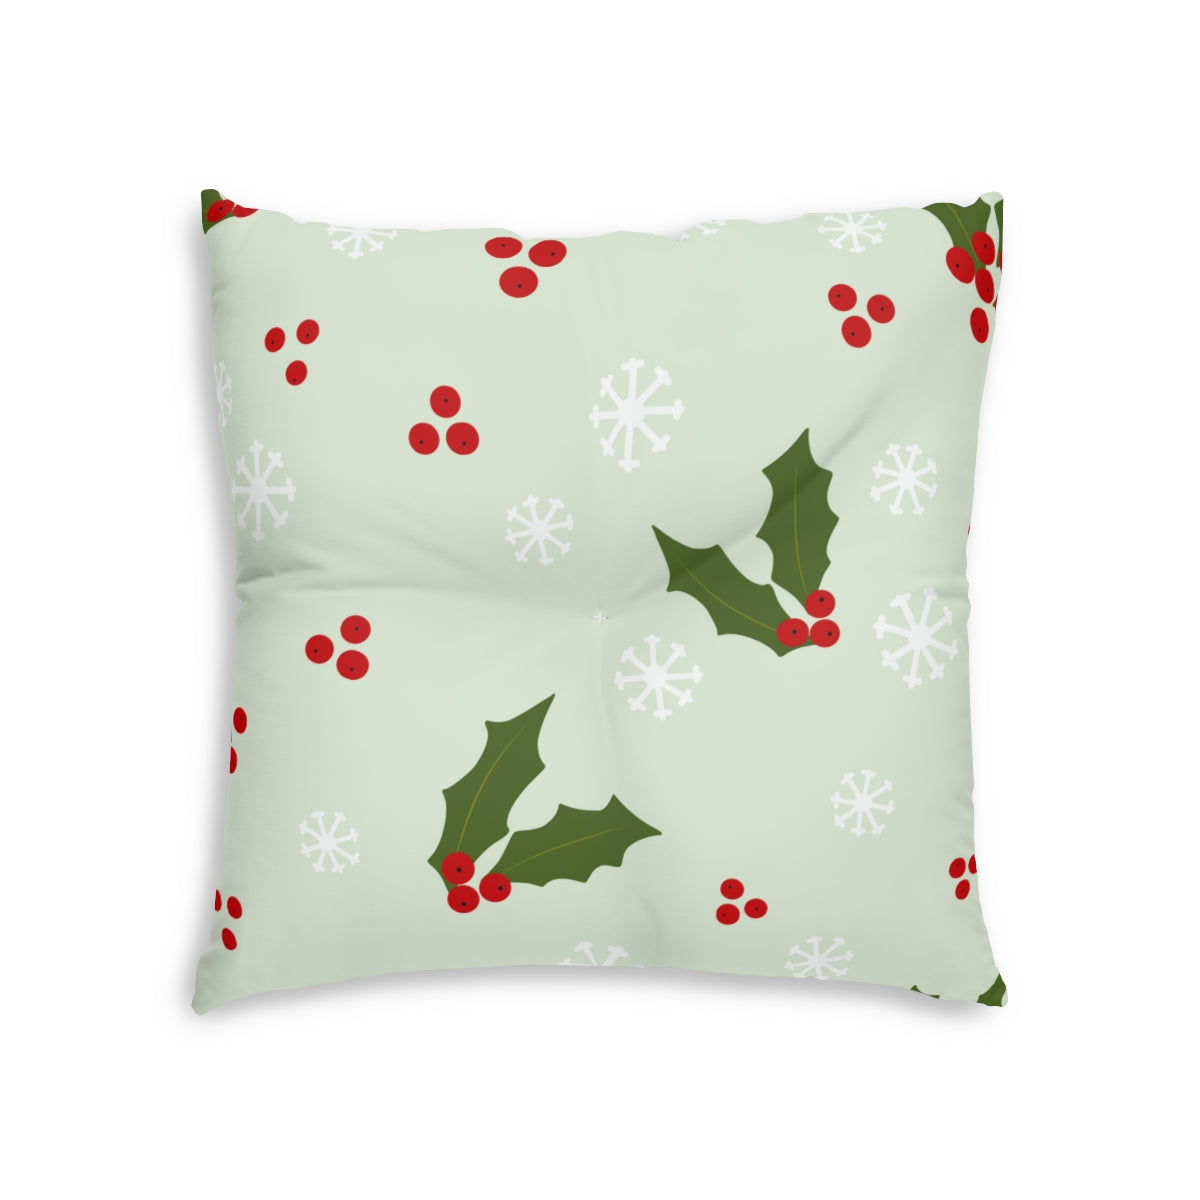 Lifestyle Details - Square Tufted Holiday Floor Pillow - Holly & Snowflakes - 26x26 - Front View